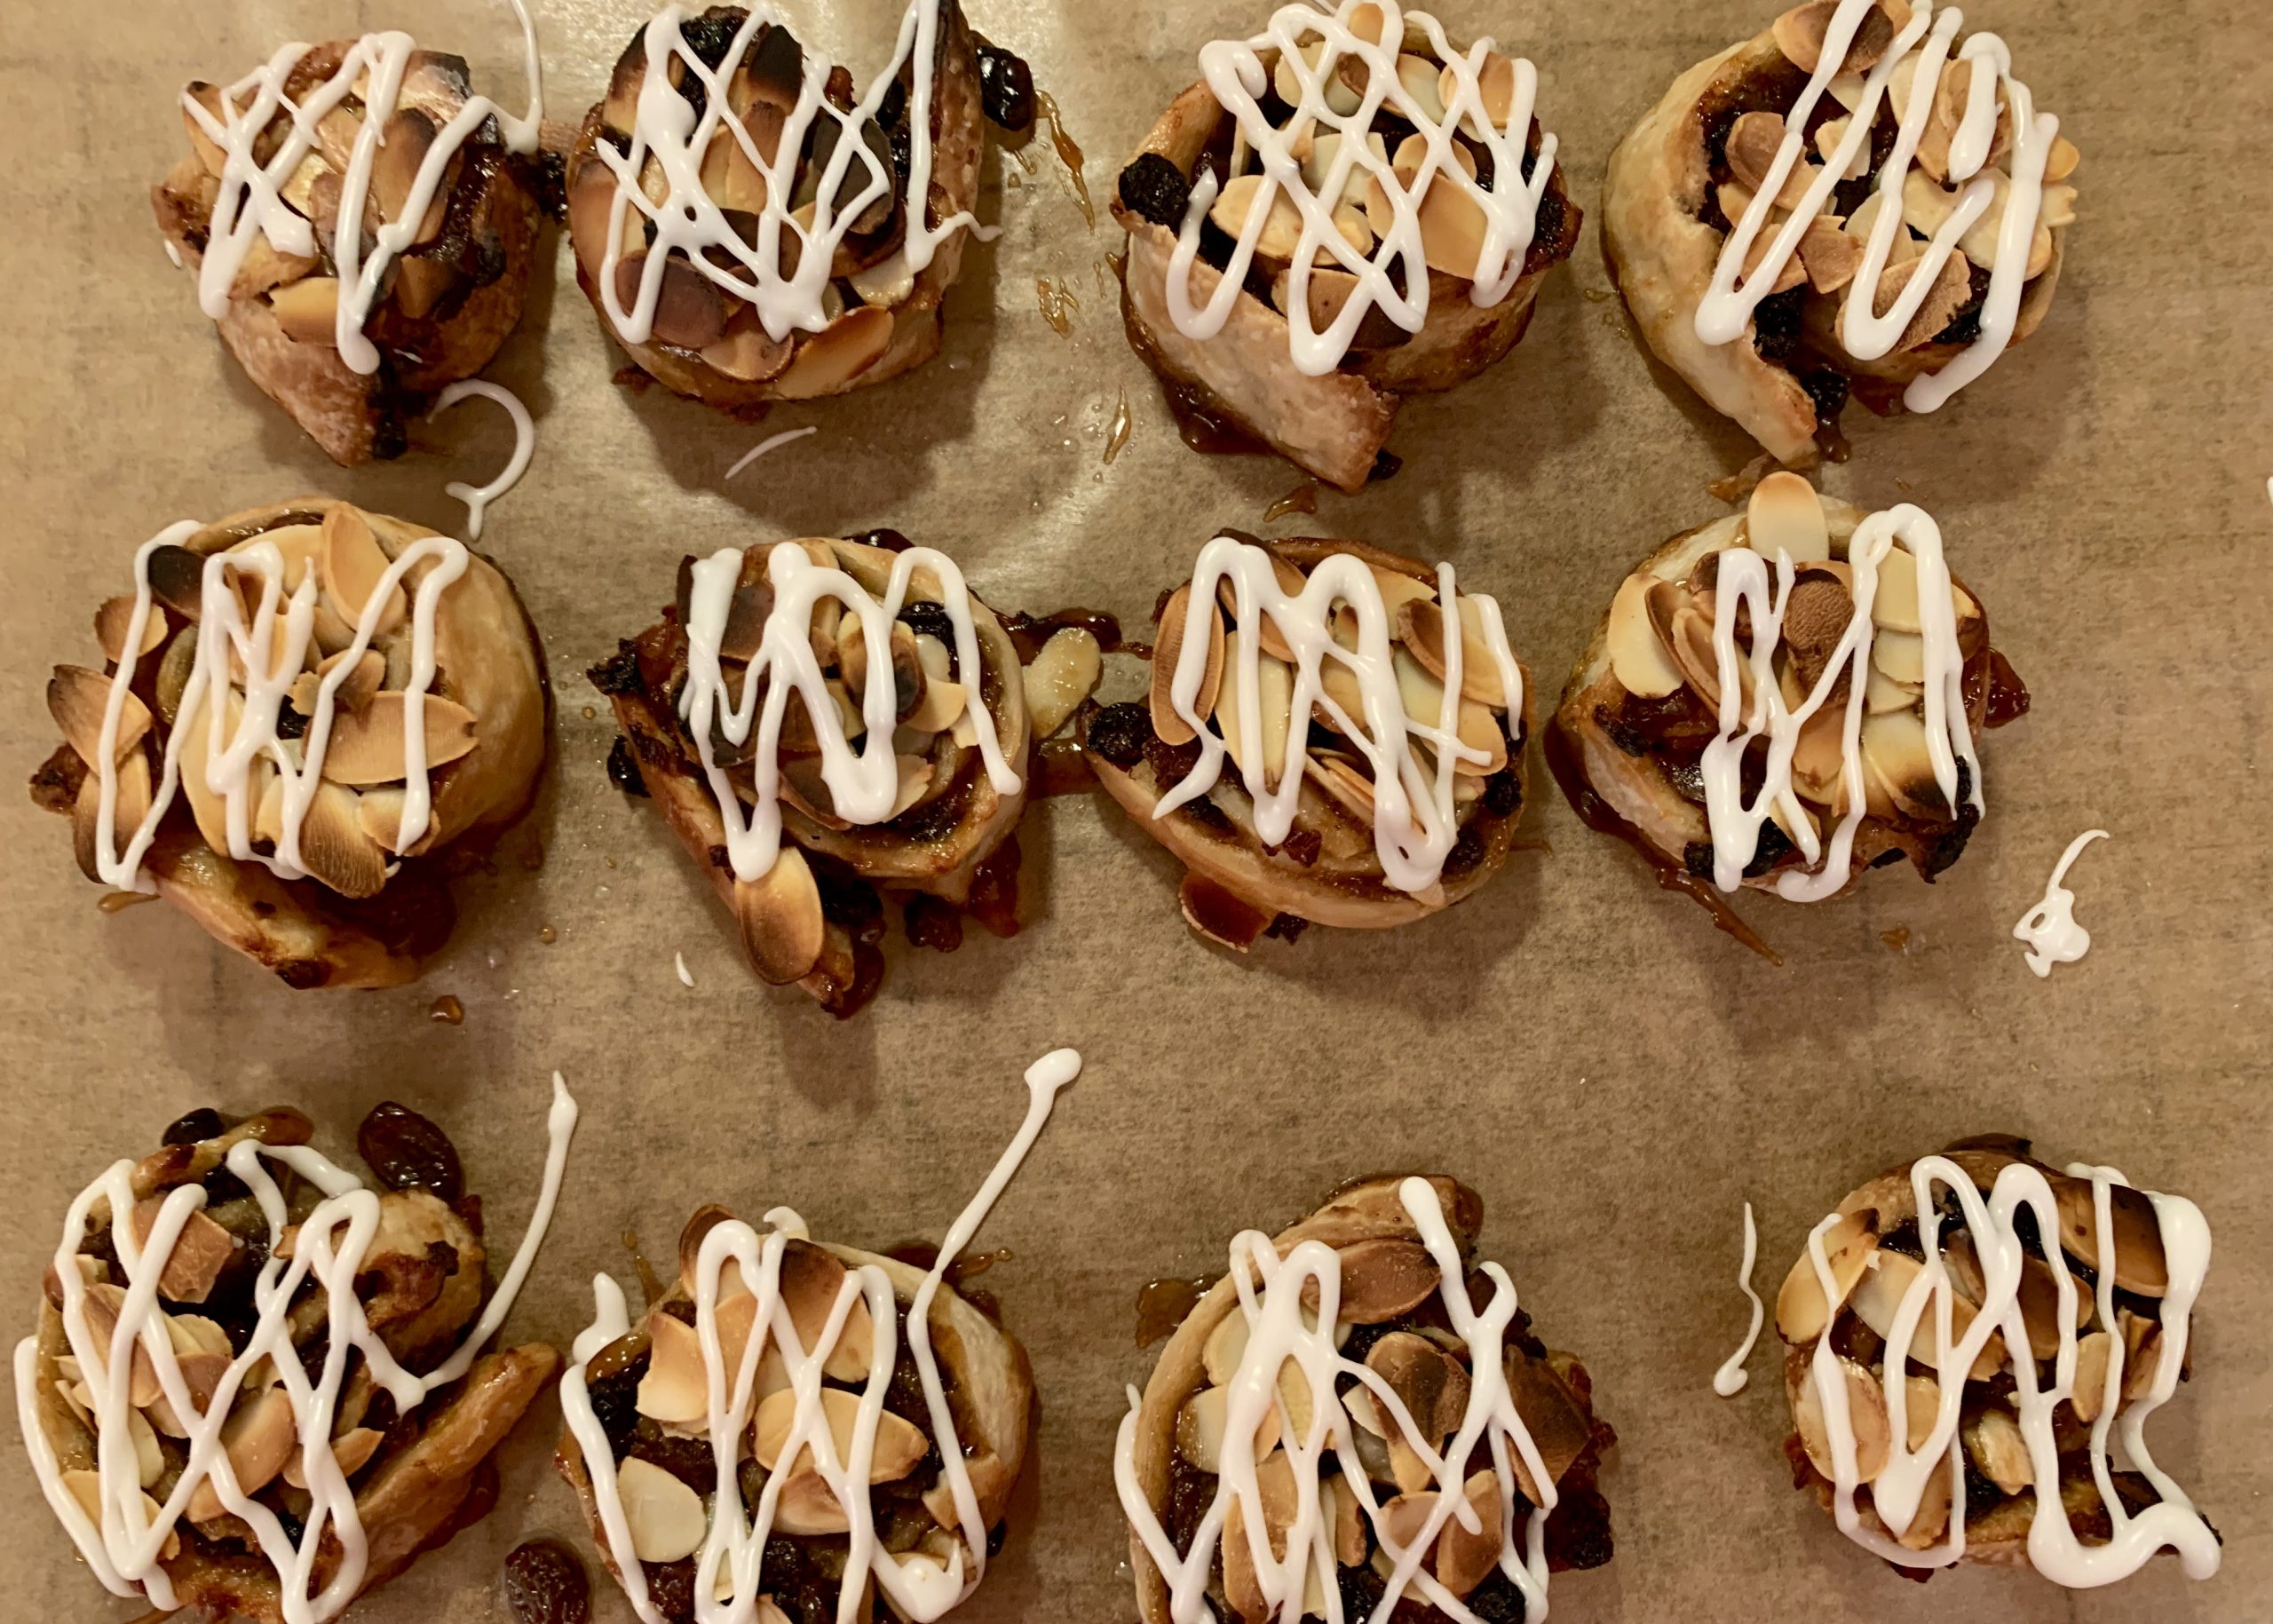 Gluten free mincemeat, cherry and almond swirls drizzled with glace icing